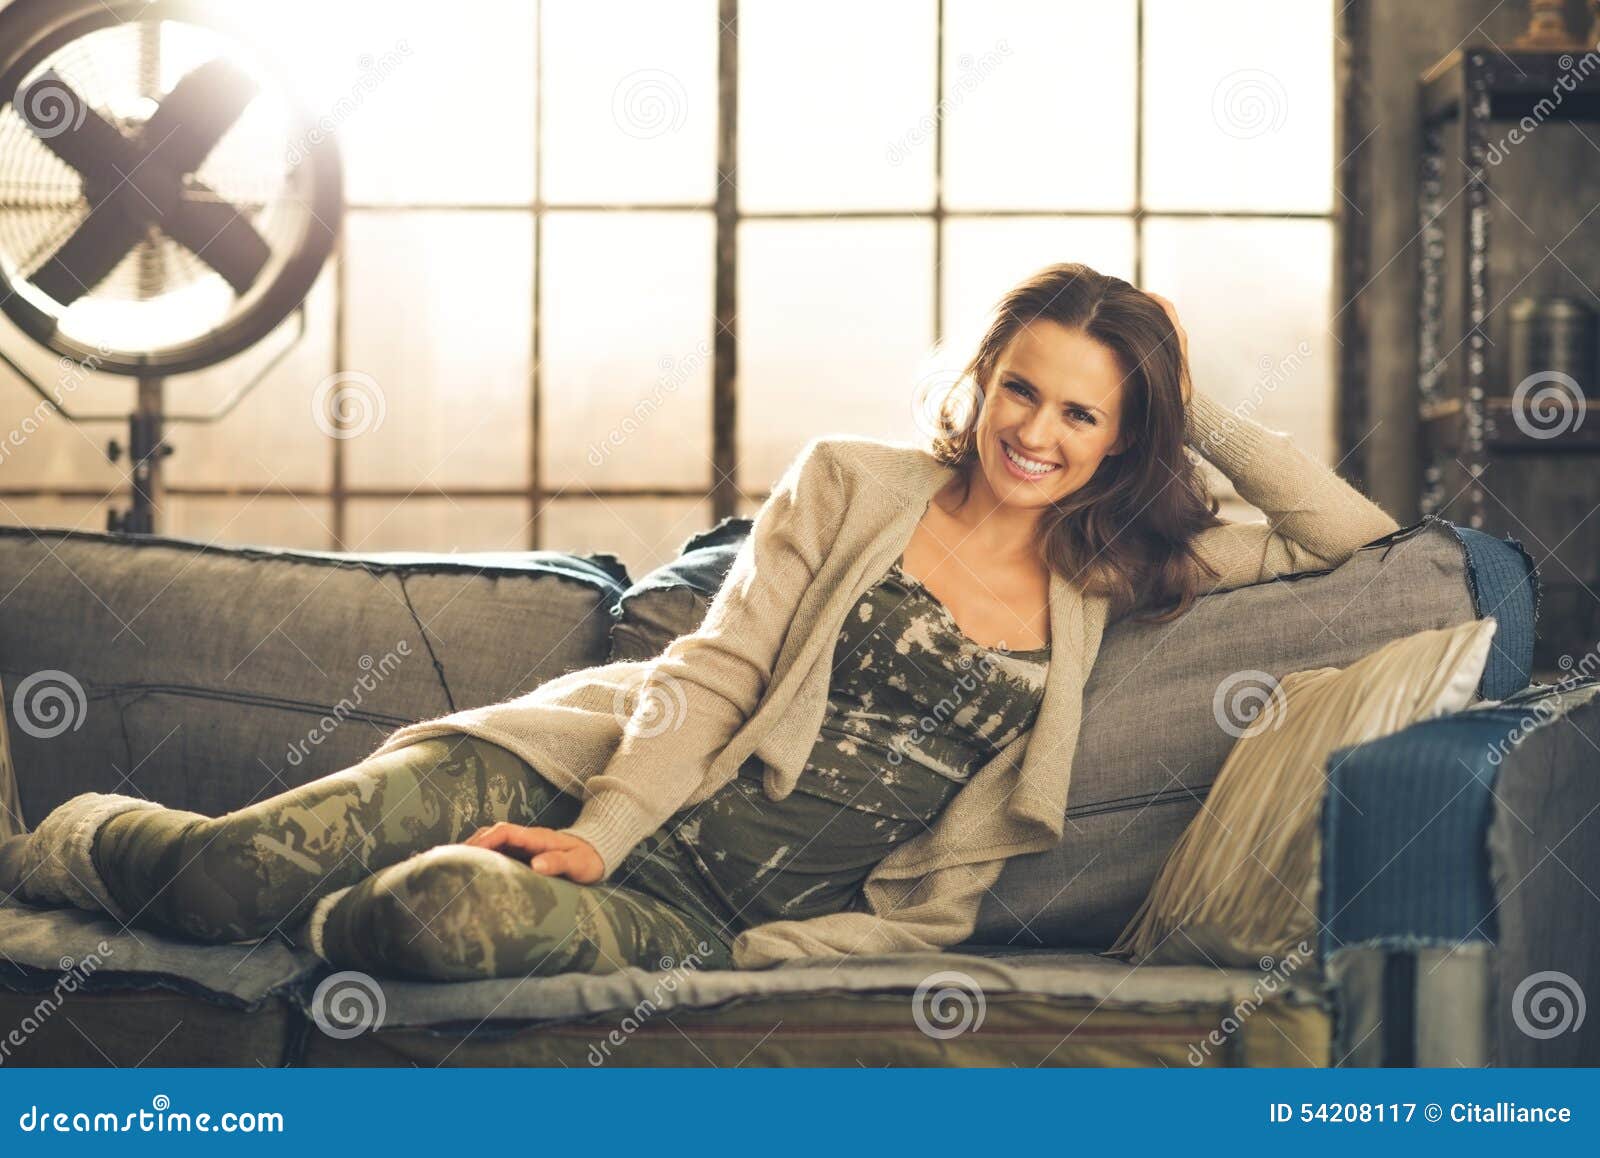 A Brunette Woman is Smiling, Relaxing on a Sofa Stock Image